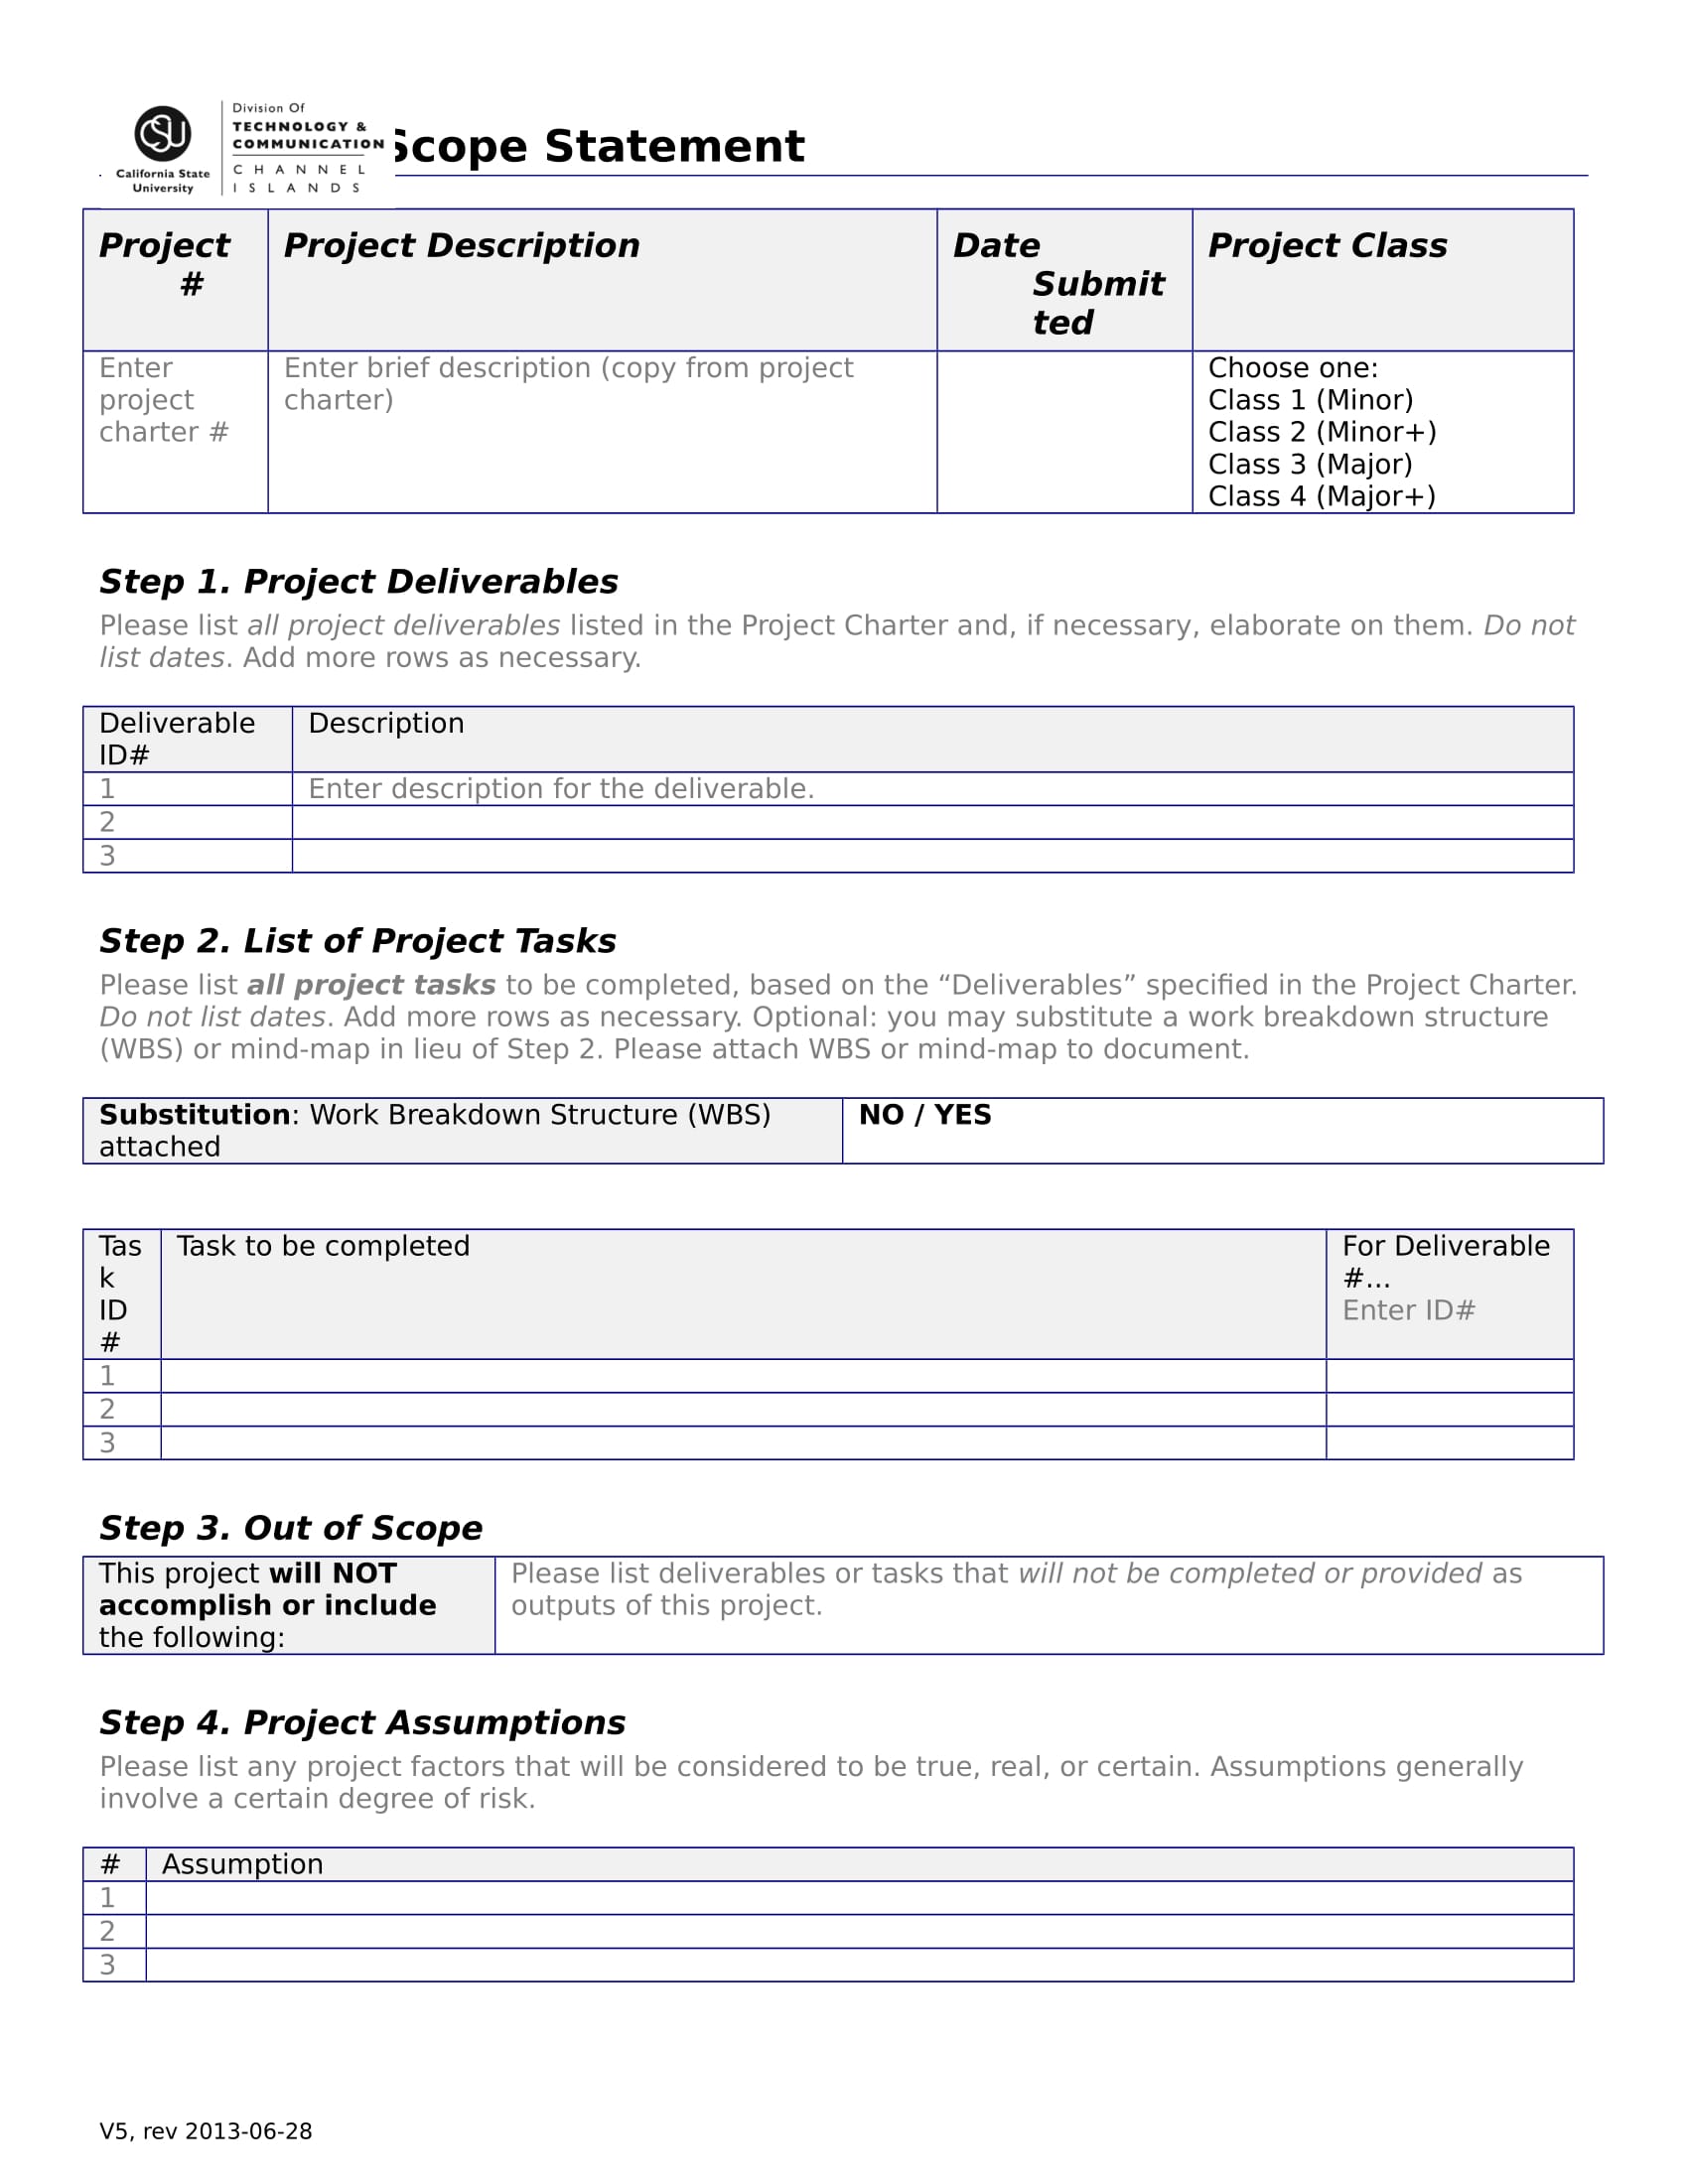 project scope statement form 1